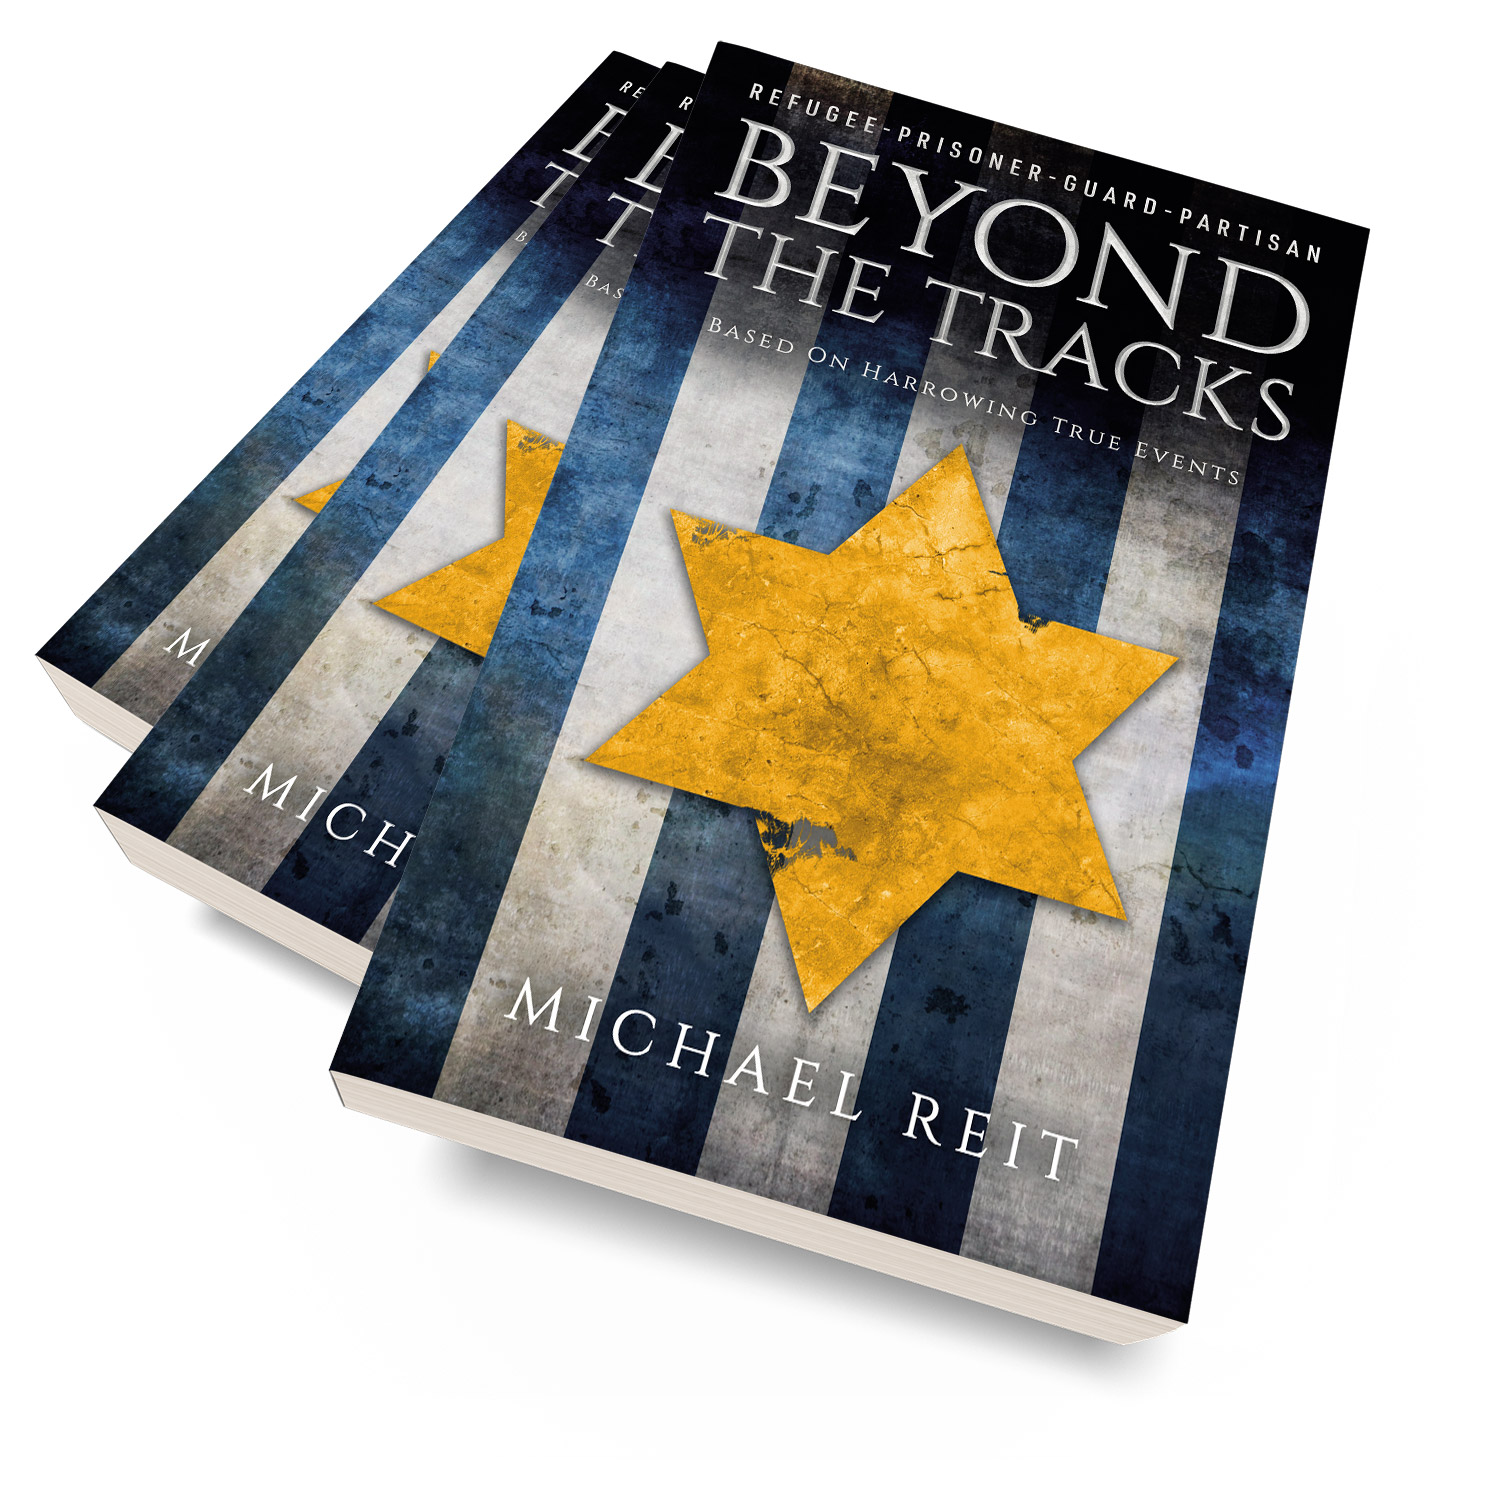 'Beyond The Tracks' is a harrowing tale of survival during WW2. The author is Michael Reit. The book cover design and interior formatting are by Mark Thomas. To learn more about what Mark could do for your book, please visit coverness.com.